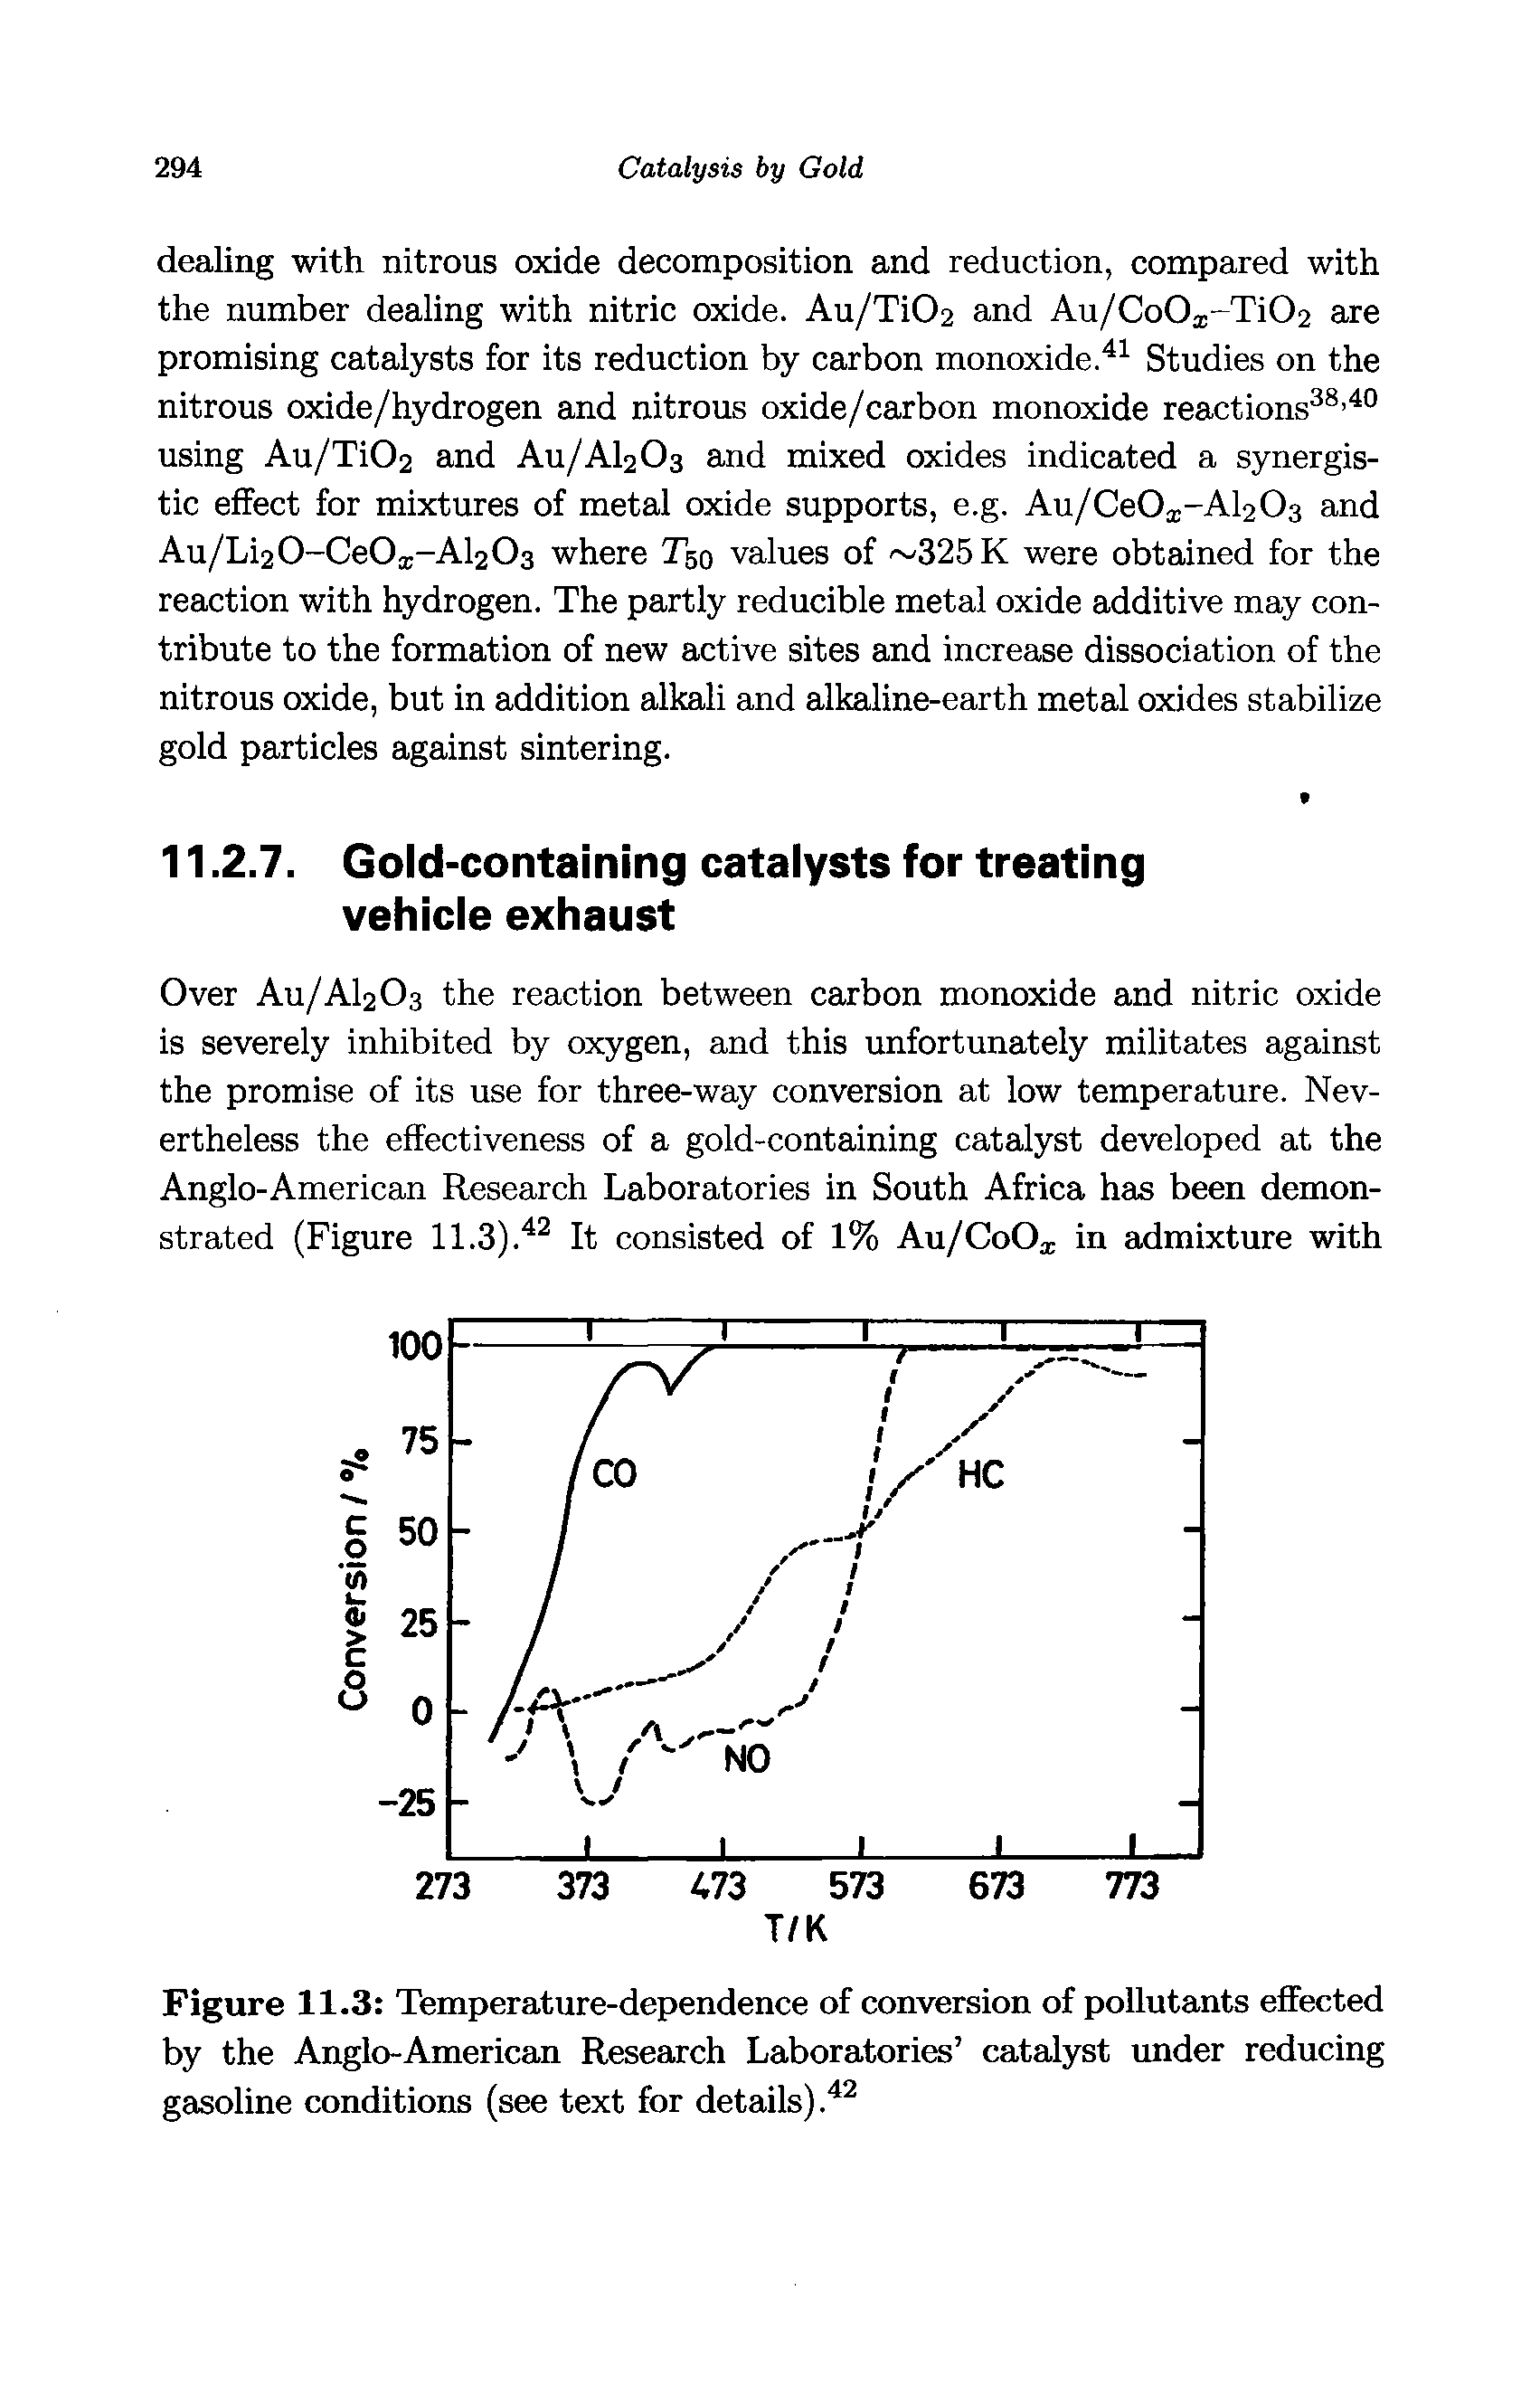 Figure 11.3 Temperature-dependence of conversion of pollutants effected by the Anglo-American Research Laboratories catalyst under reducing gasoline conditions (see text for details).42...